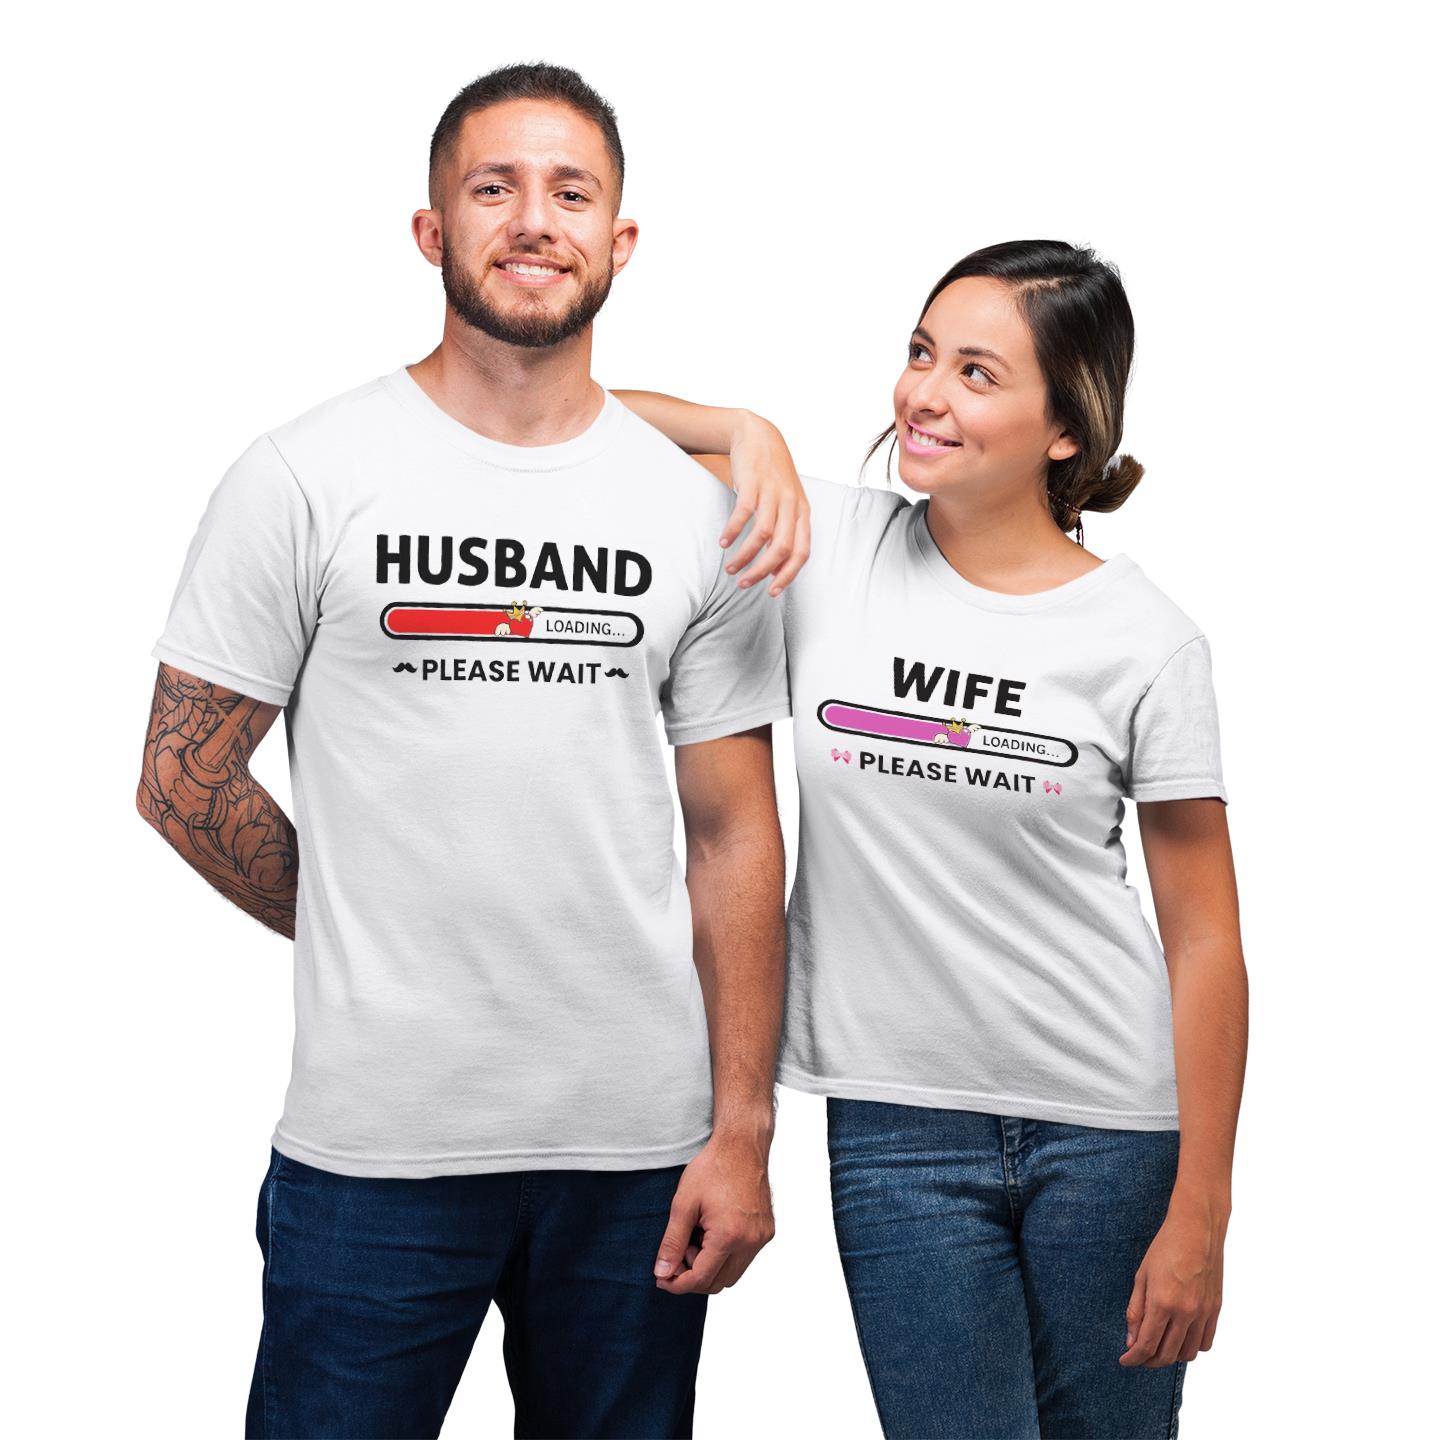 Matching Wife Loading Husband Loading For Pre Wedding Husband Wife Mr Mrs His And Hers Gift T-Shirt